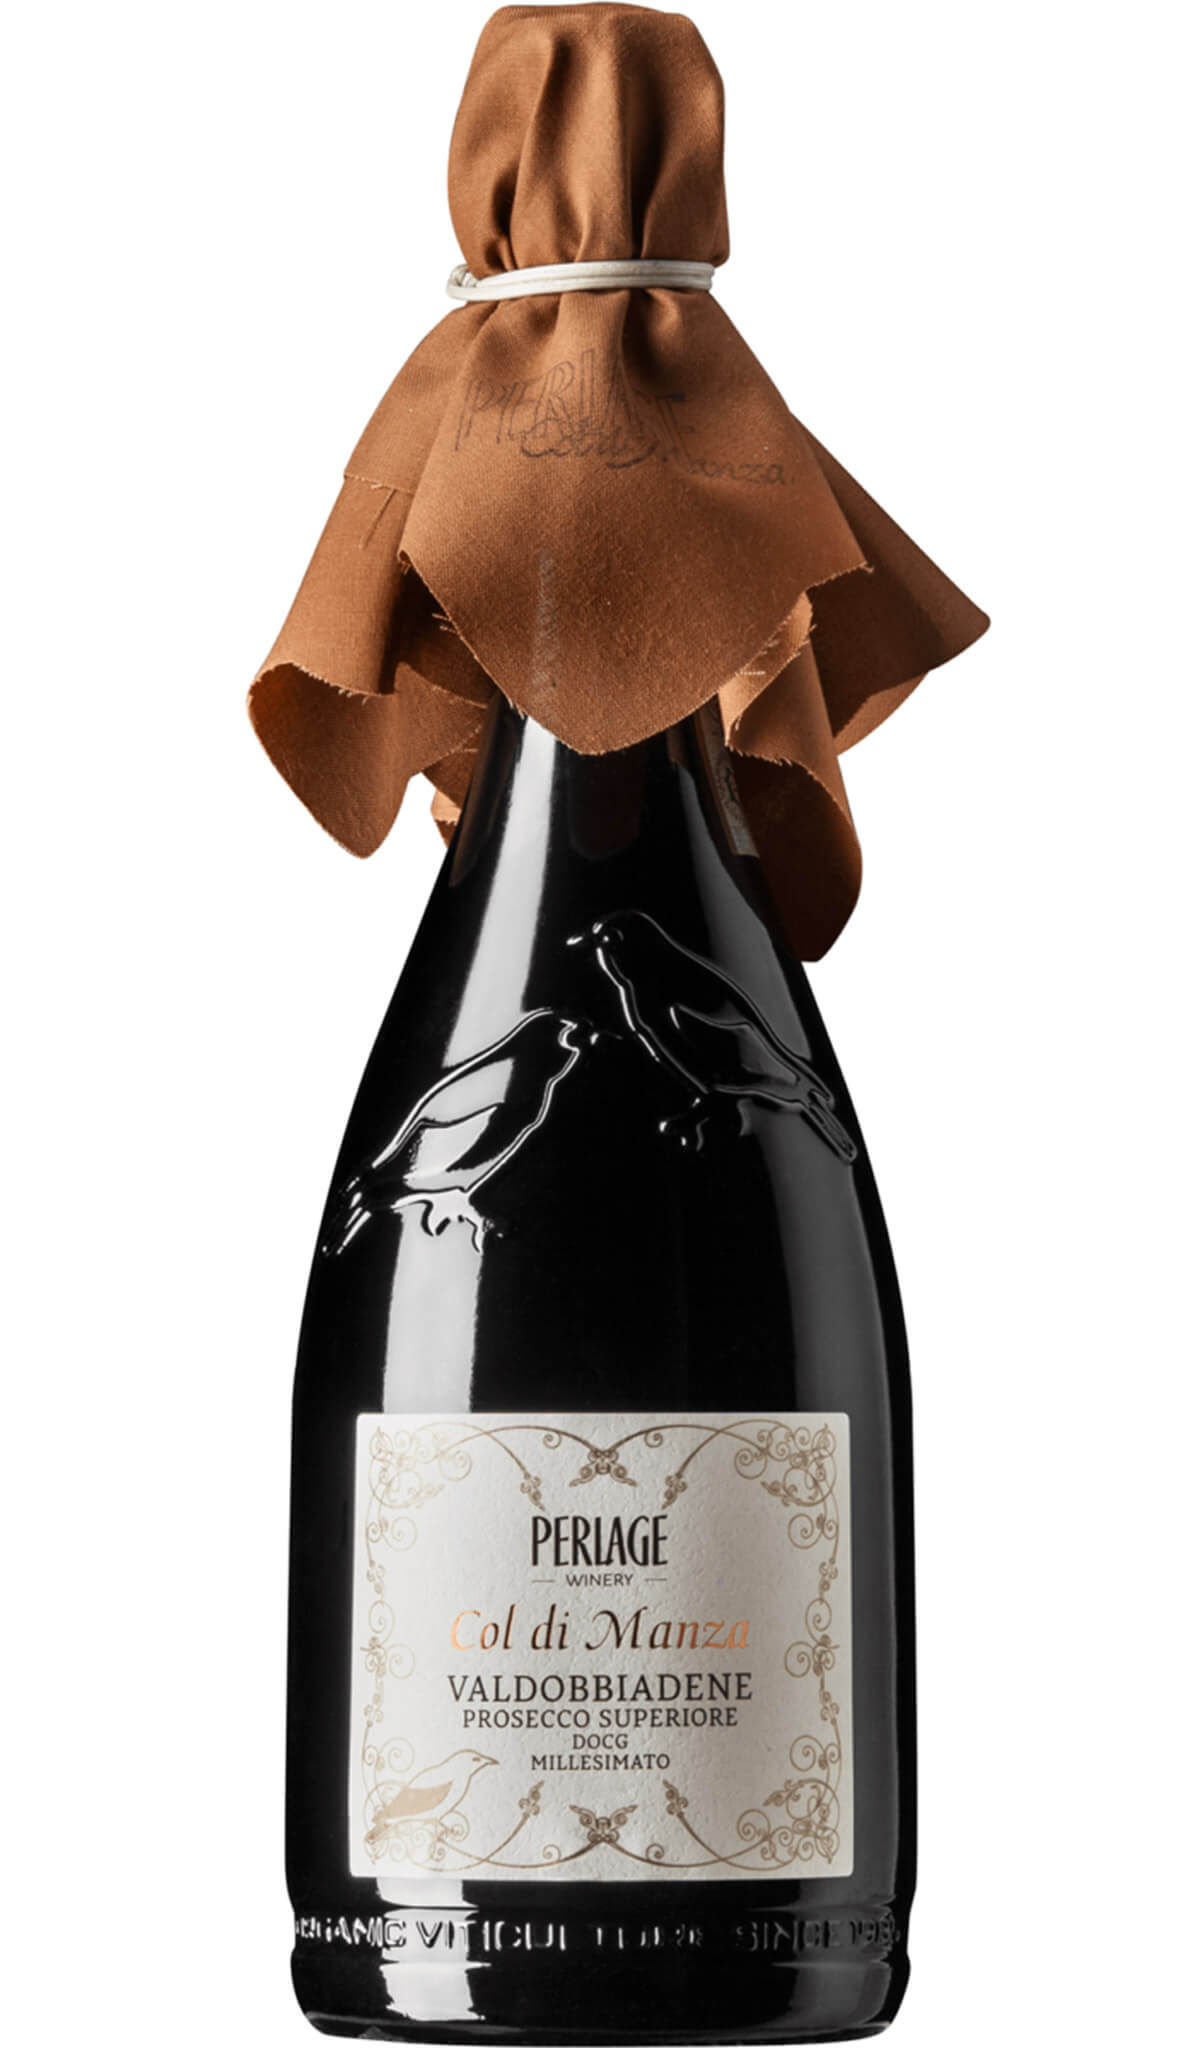 Find out more, explore the range and purchase Perlage Col Di Manza Valdobbiadene Prosecco Superiore DOCG available online at Wine Sellers Direct - Australia's independent liquor specialists.